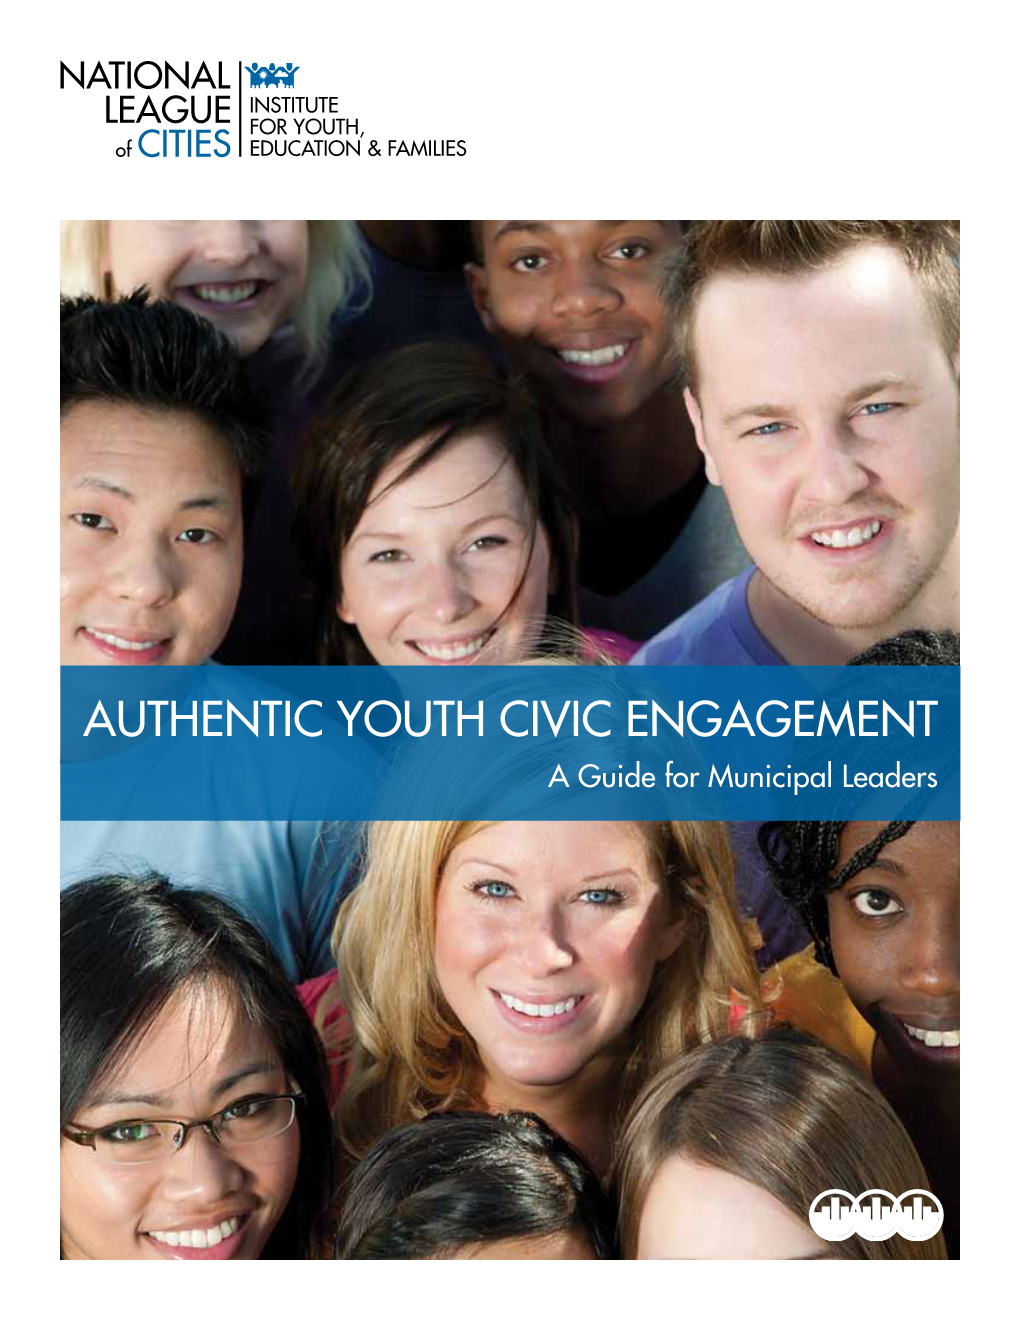 Authentic Youth Civic Engagement a Guide for Municipal Leaders About the National League of Cities Institute for Youth, Education and Families